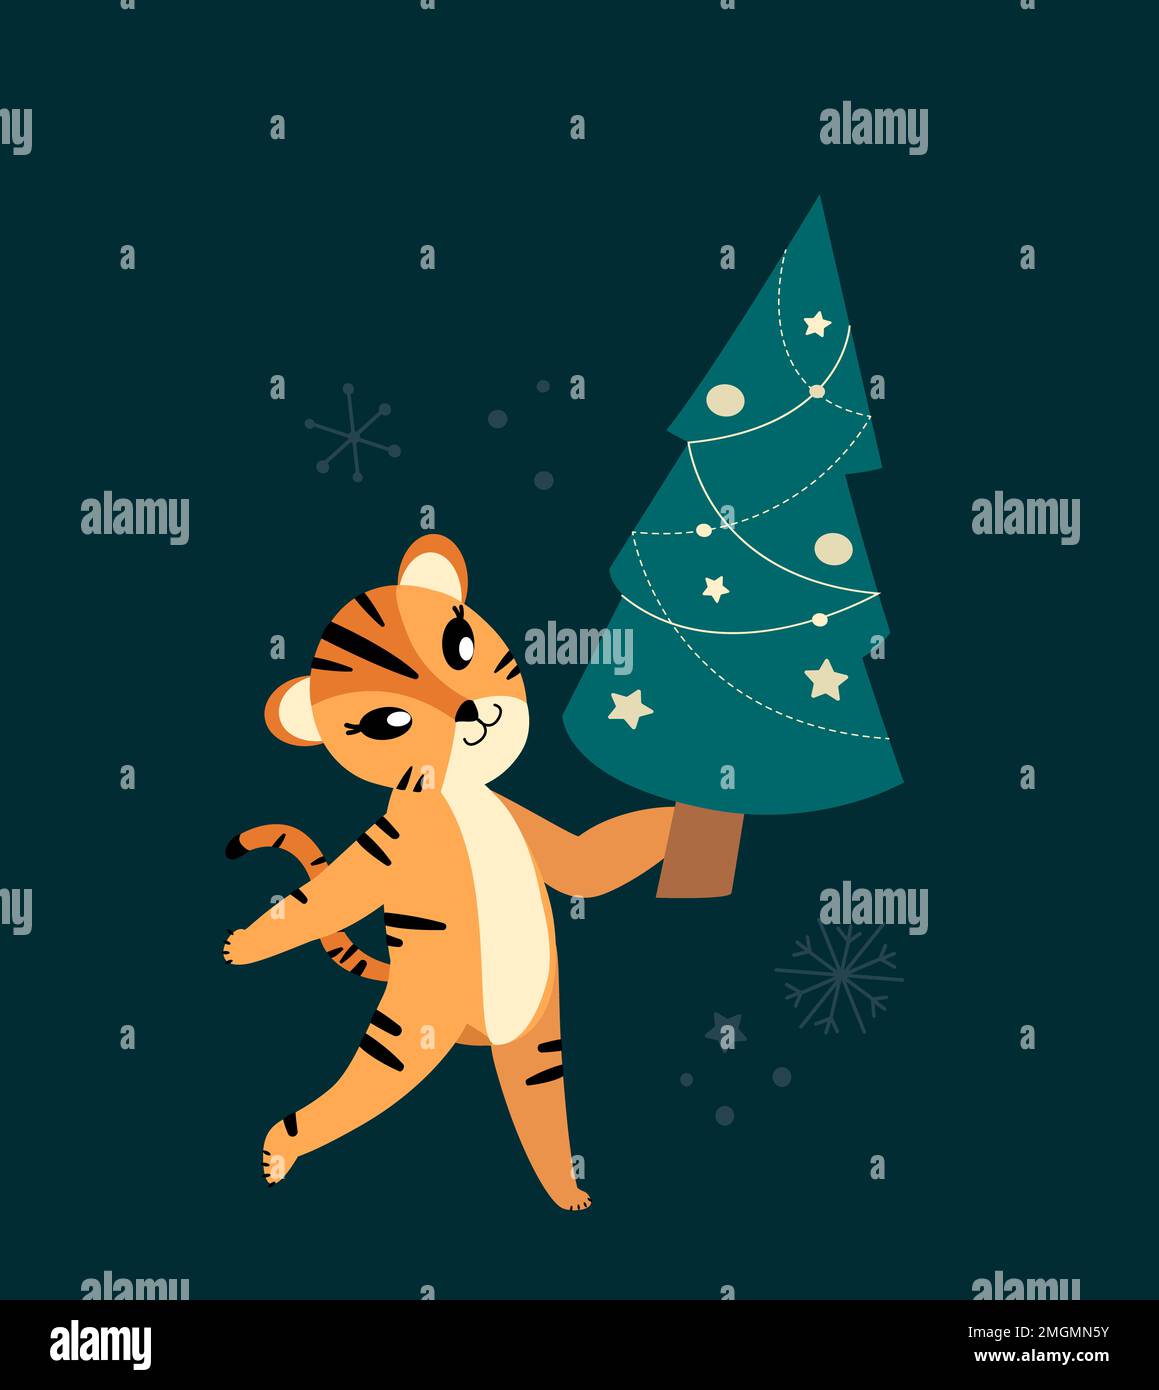 Chinese Tiger,Happy New Year Christmas Greeting Card.Cute Cartoon Cat with Christmas Tree.Chinese 2022 Symbol.Holiday Animal.Winter Atmosphere.Festive Stock Photo